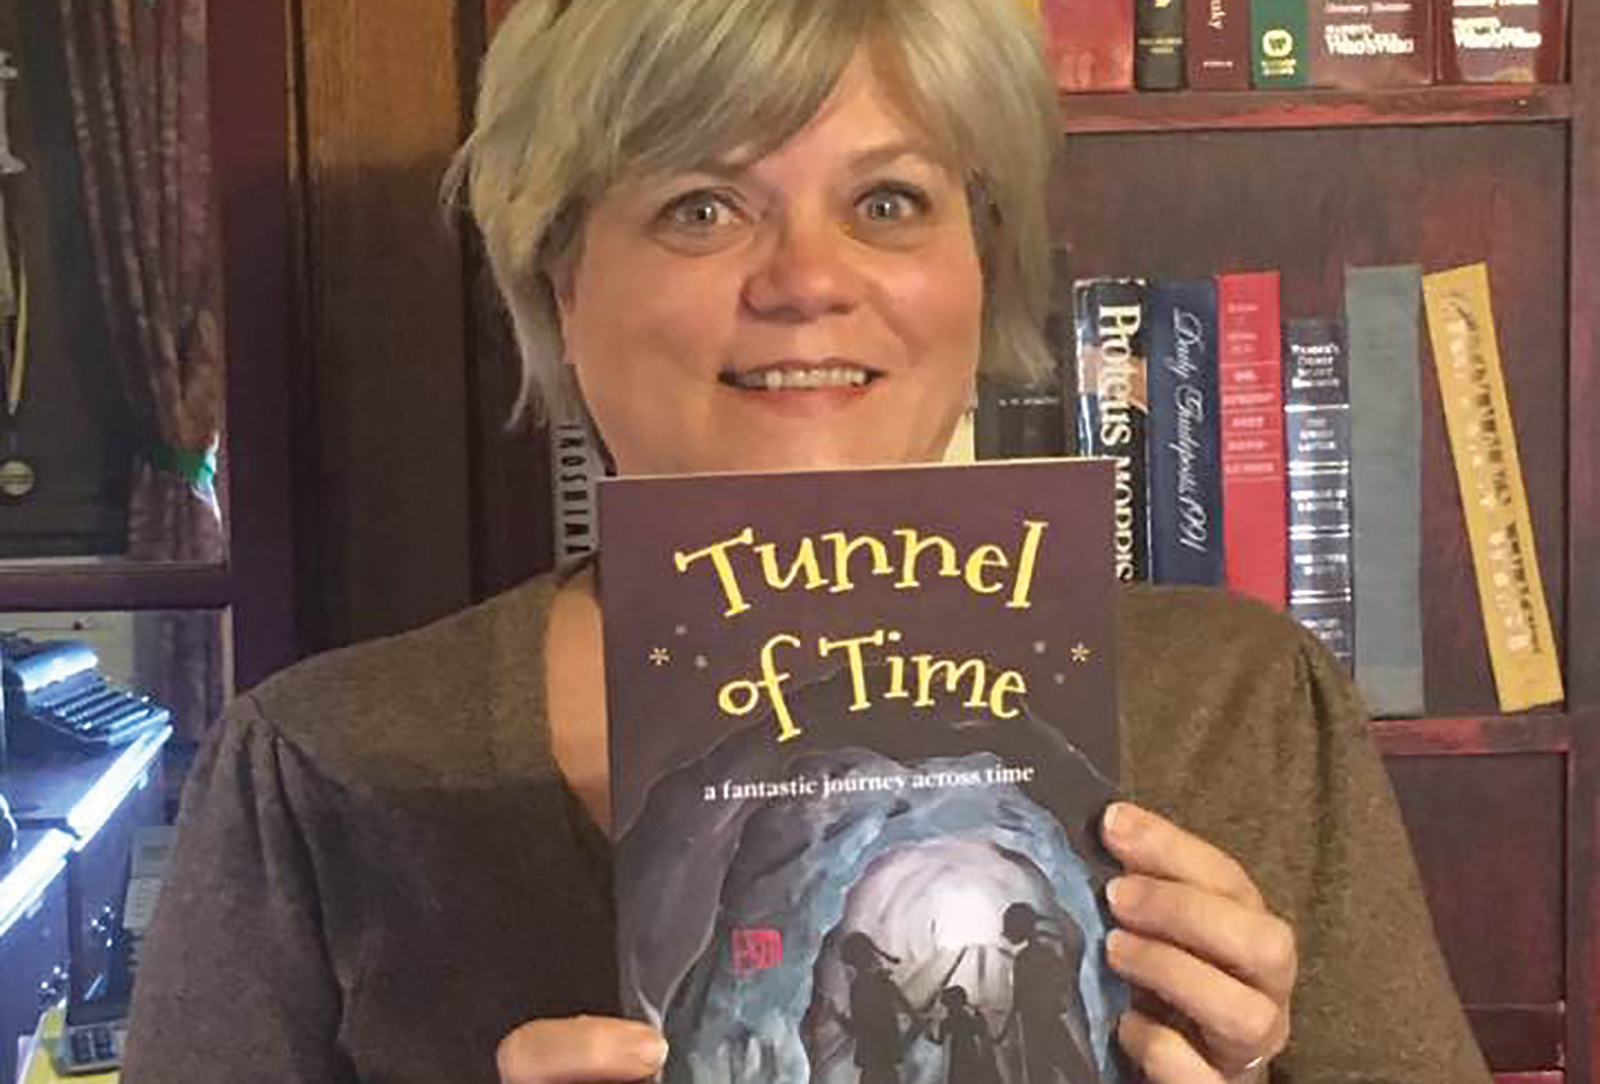 jeannie-chambers-tunnel-of-time-author-highlands-nc